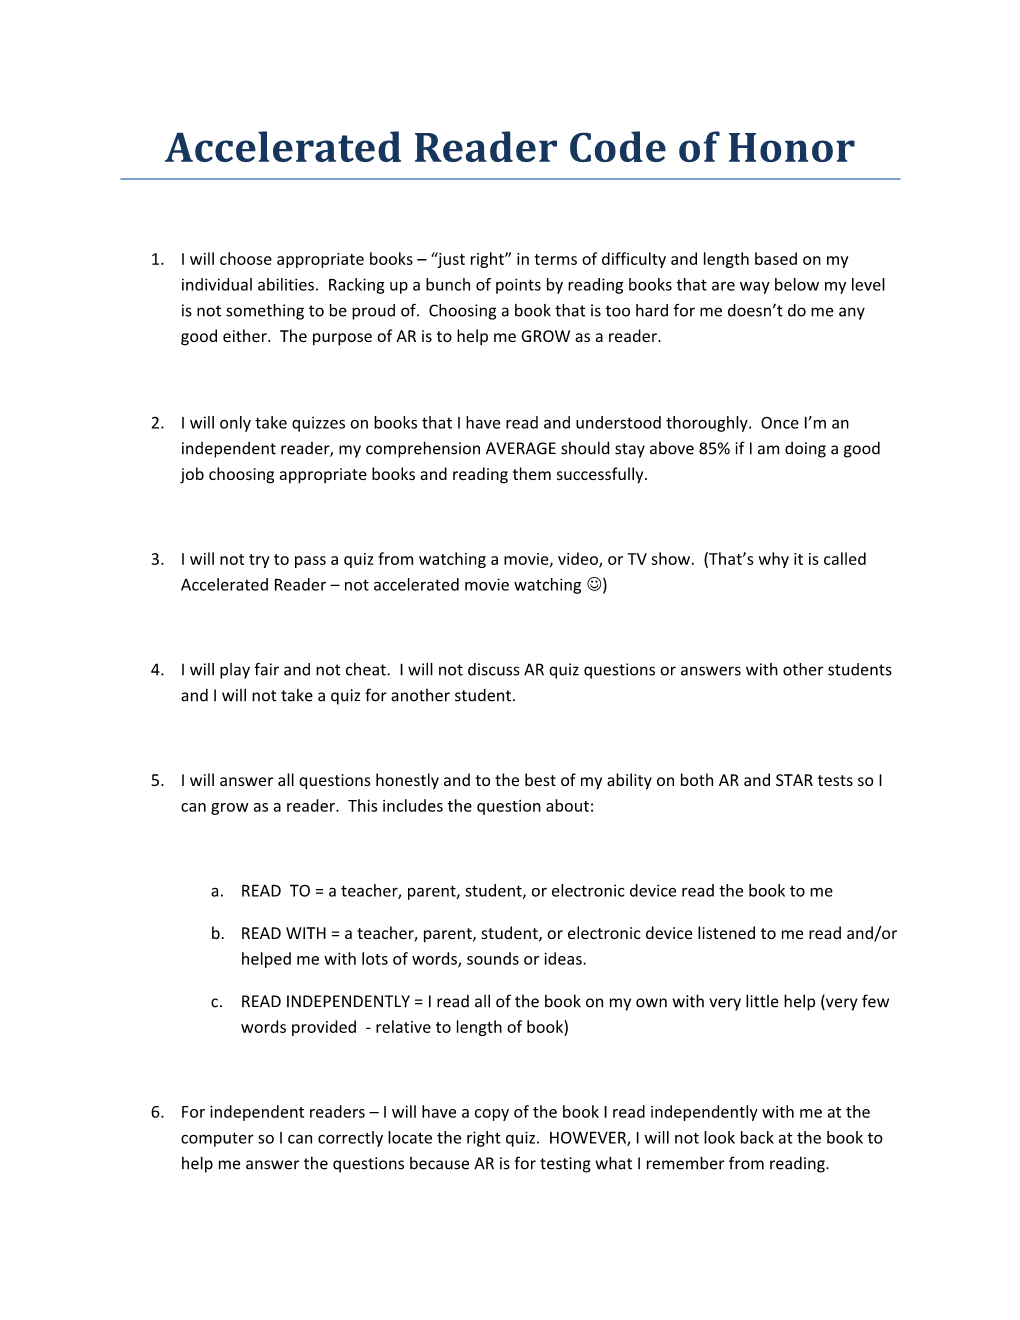 Accelerated Reader Code of Honor